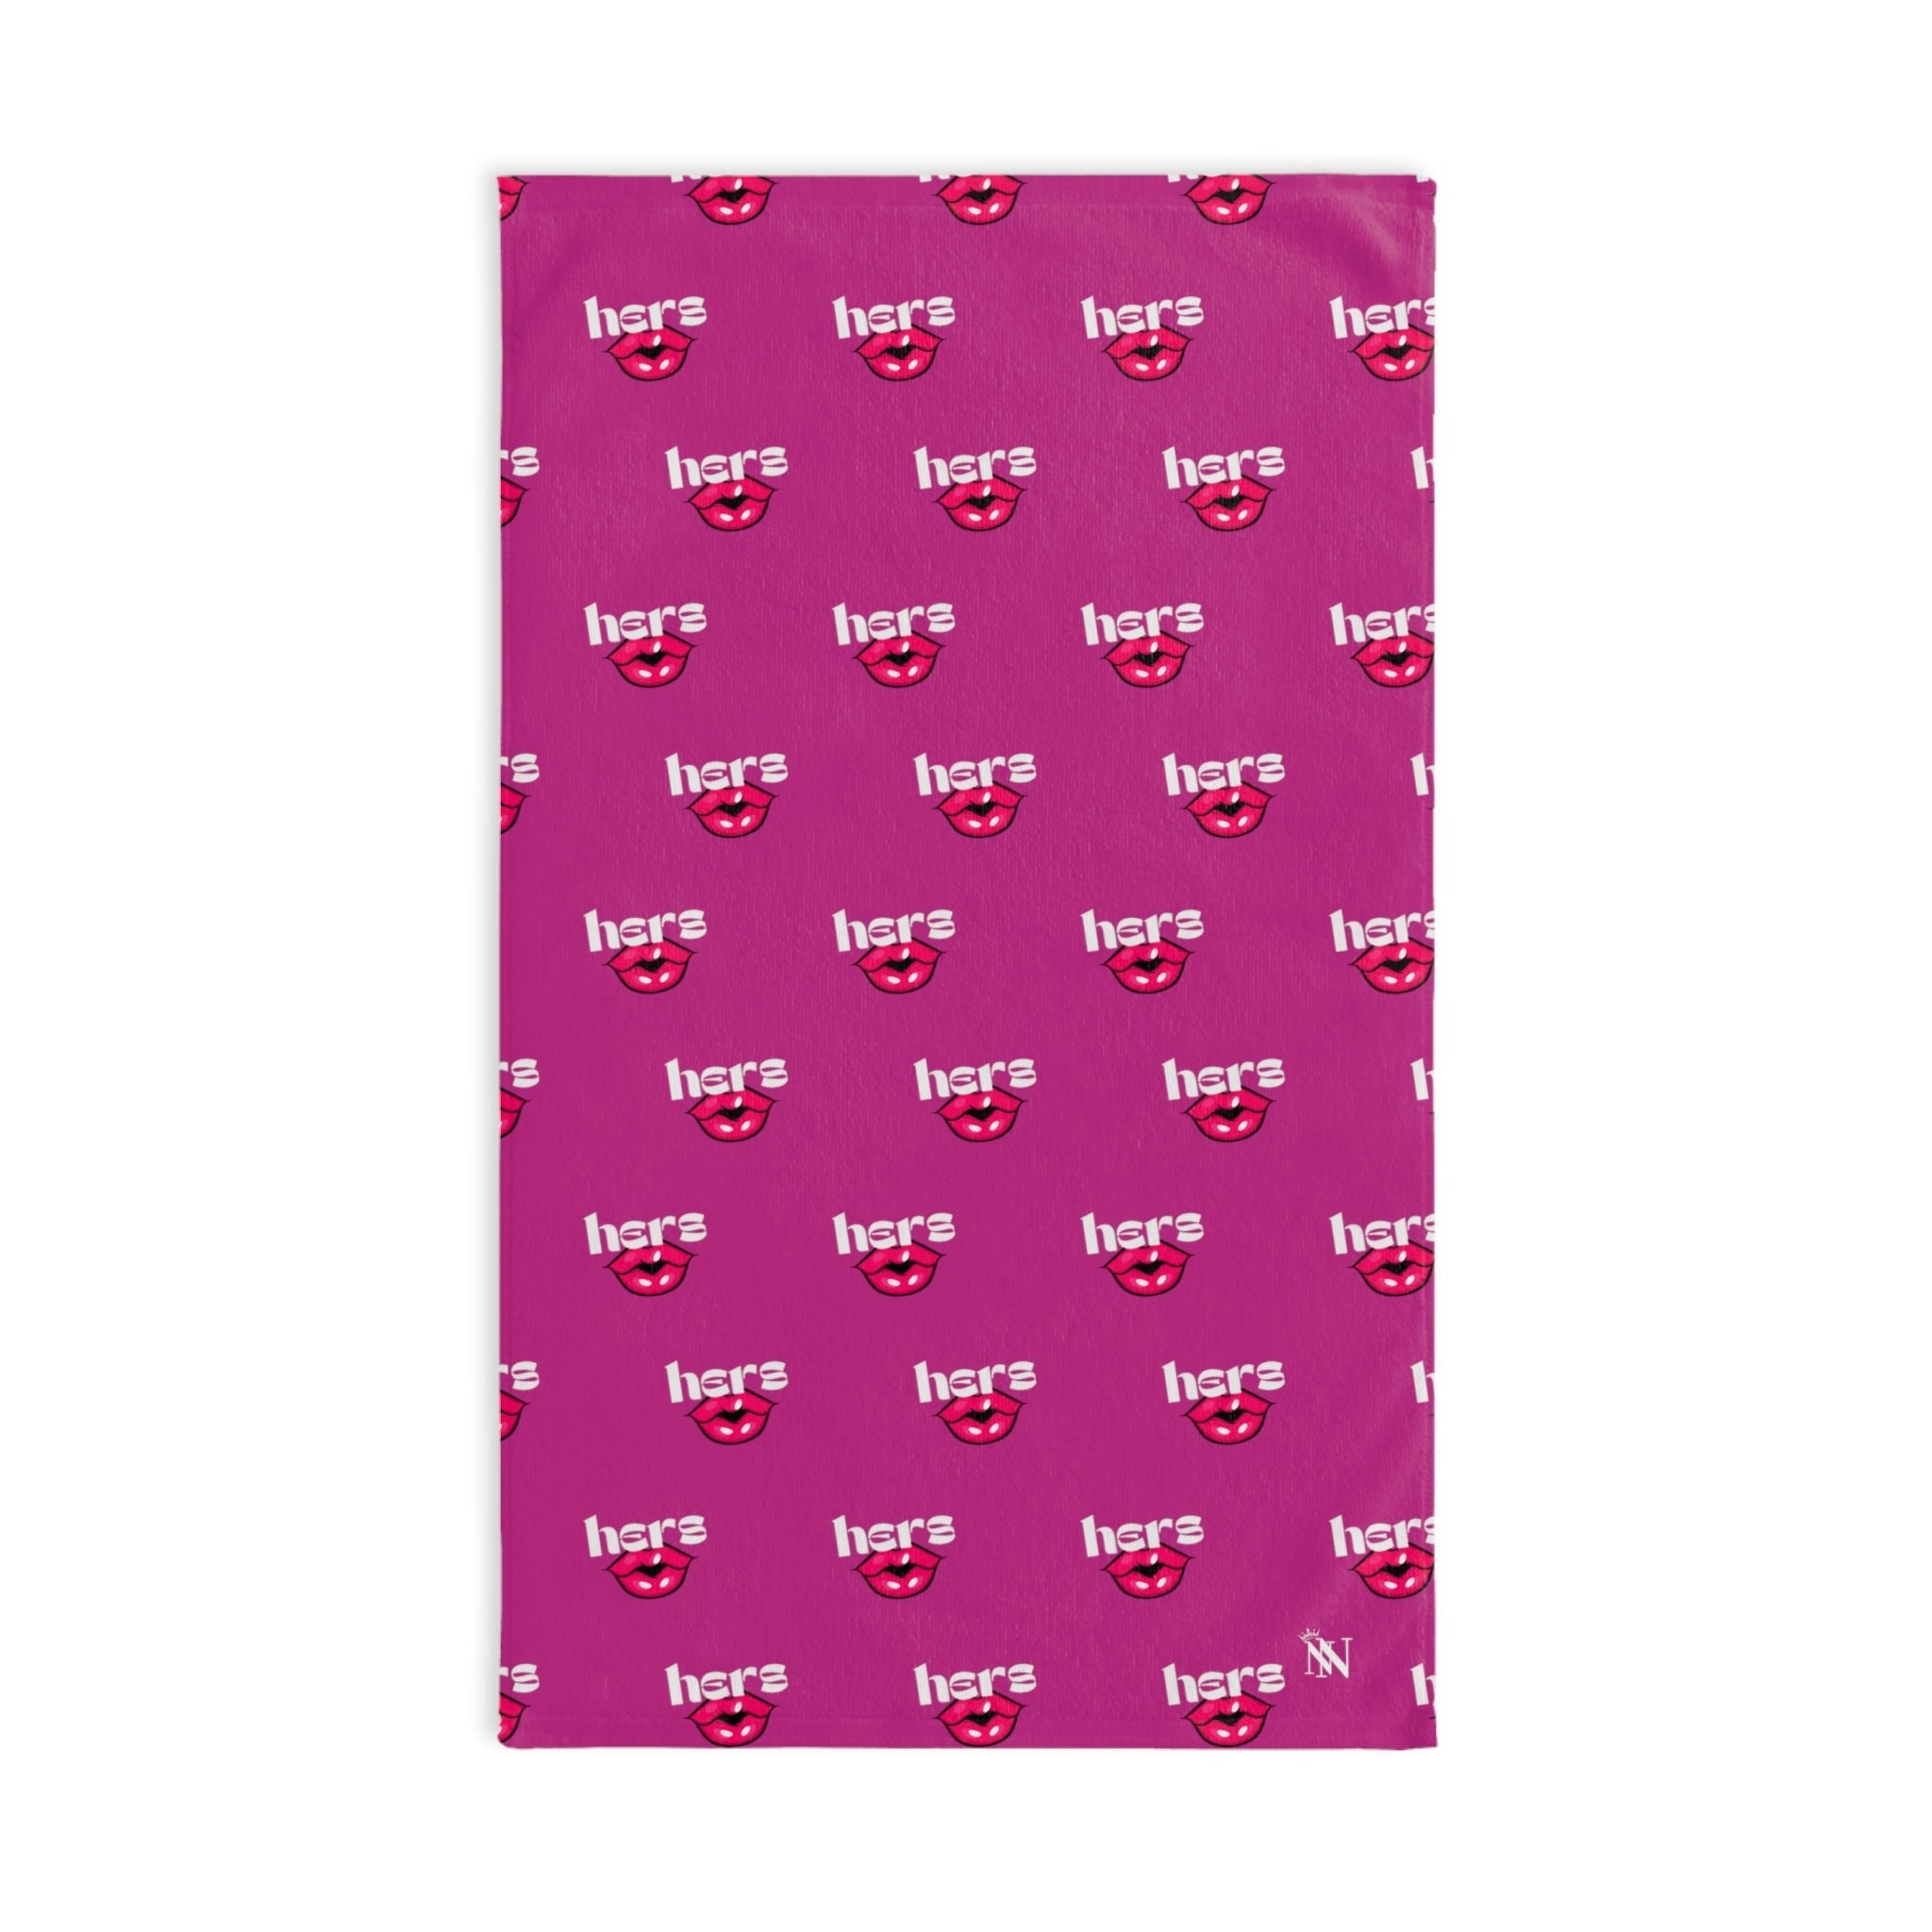 Shine Lip Pattern  Fuscia | Funny Gifts for Men - Gifts for Him - Birthday Gifts for Men, Him, Husband, Boyfriend, New Couple Gifts, Fathers & Valentines Day Gifts, Hand Towels NECTAR NAPKINS